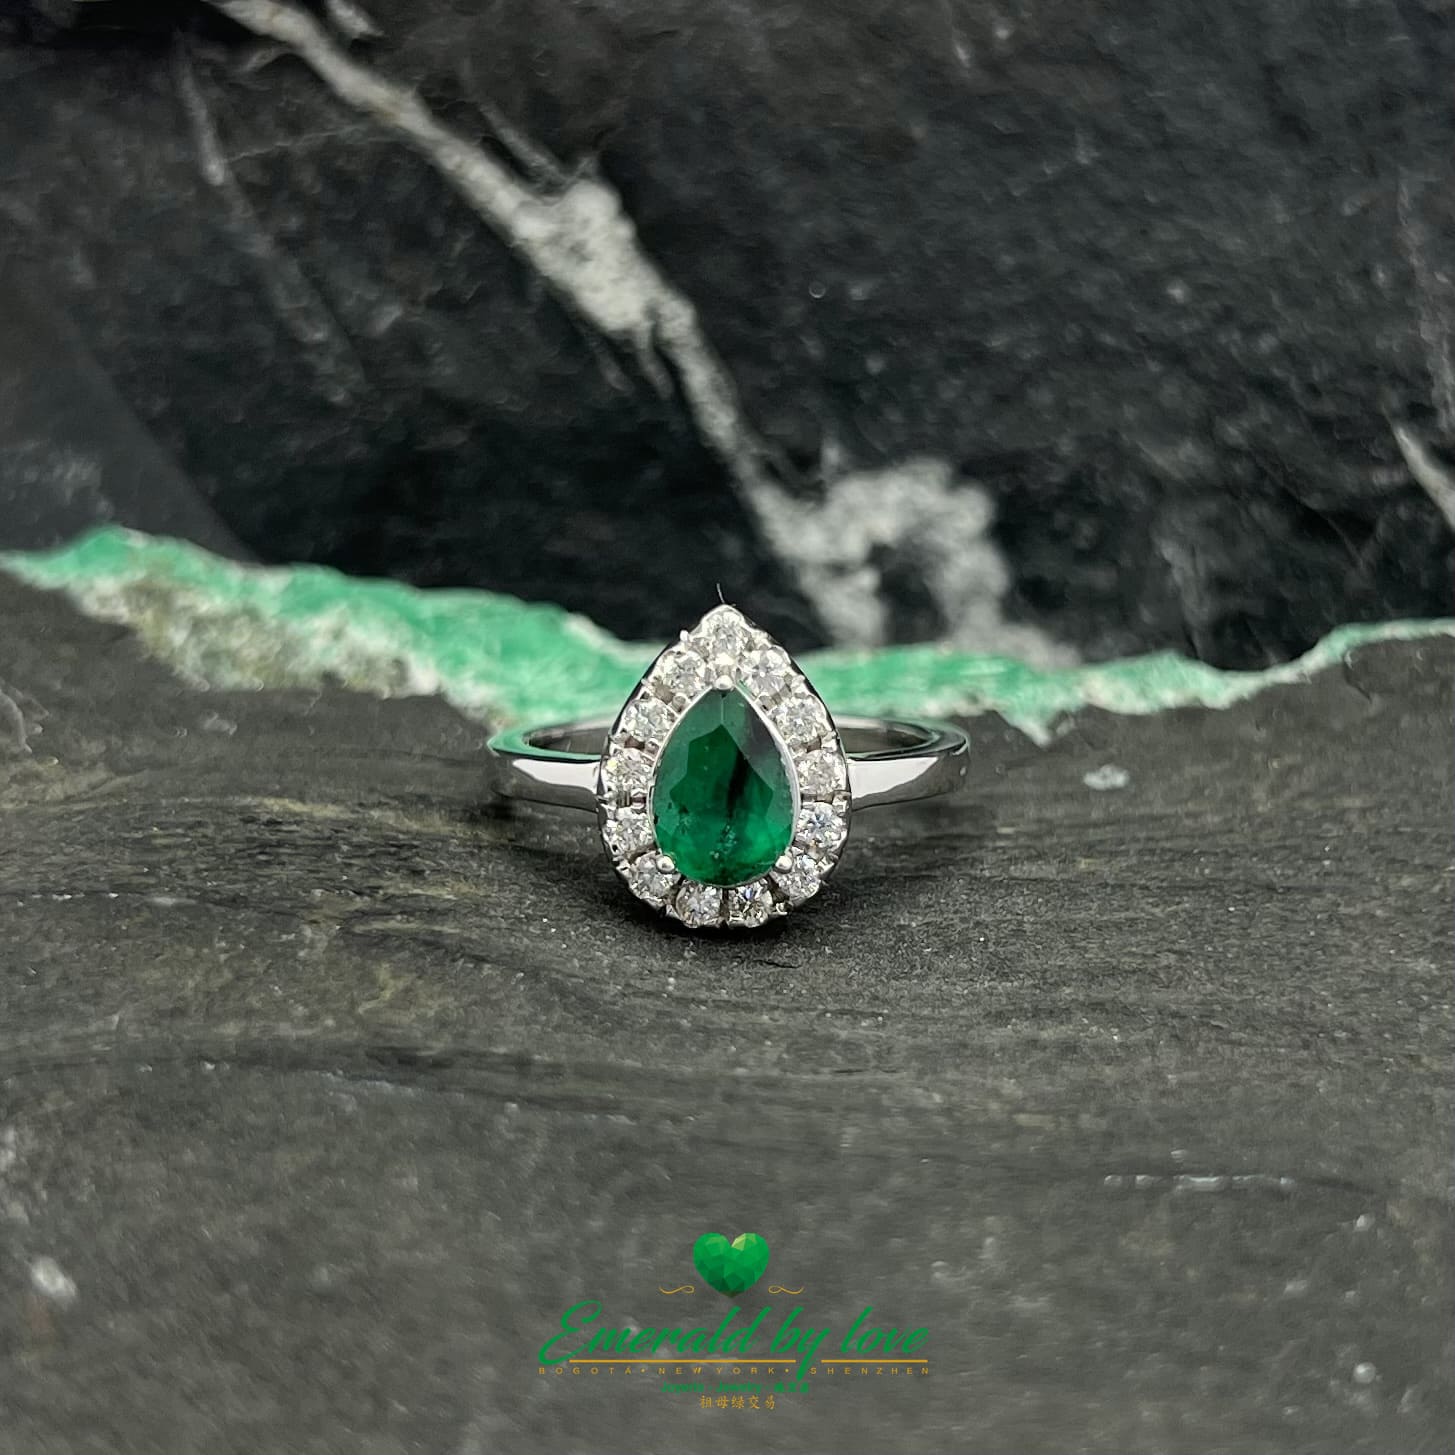 White Gold Tear-Shaped Marquise Emerald Ring with Diamond Halo